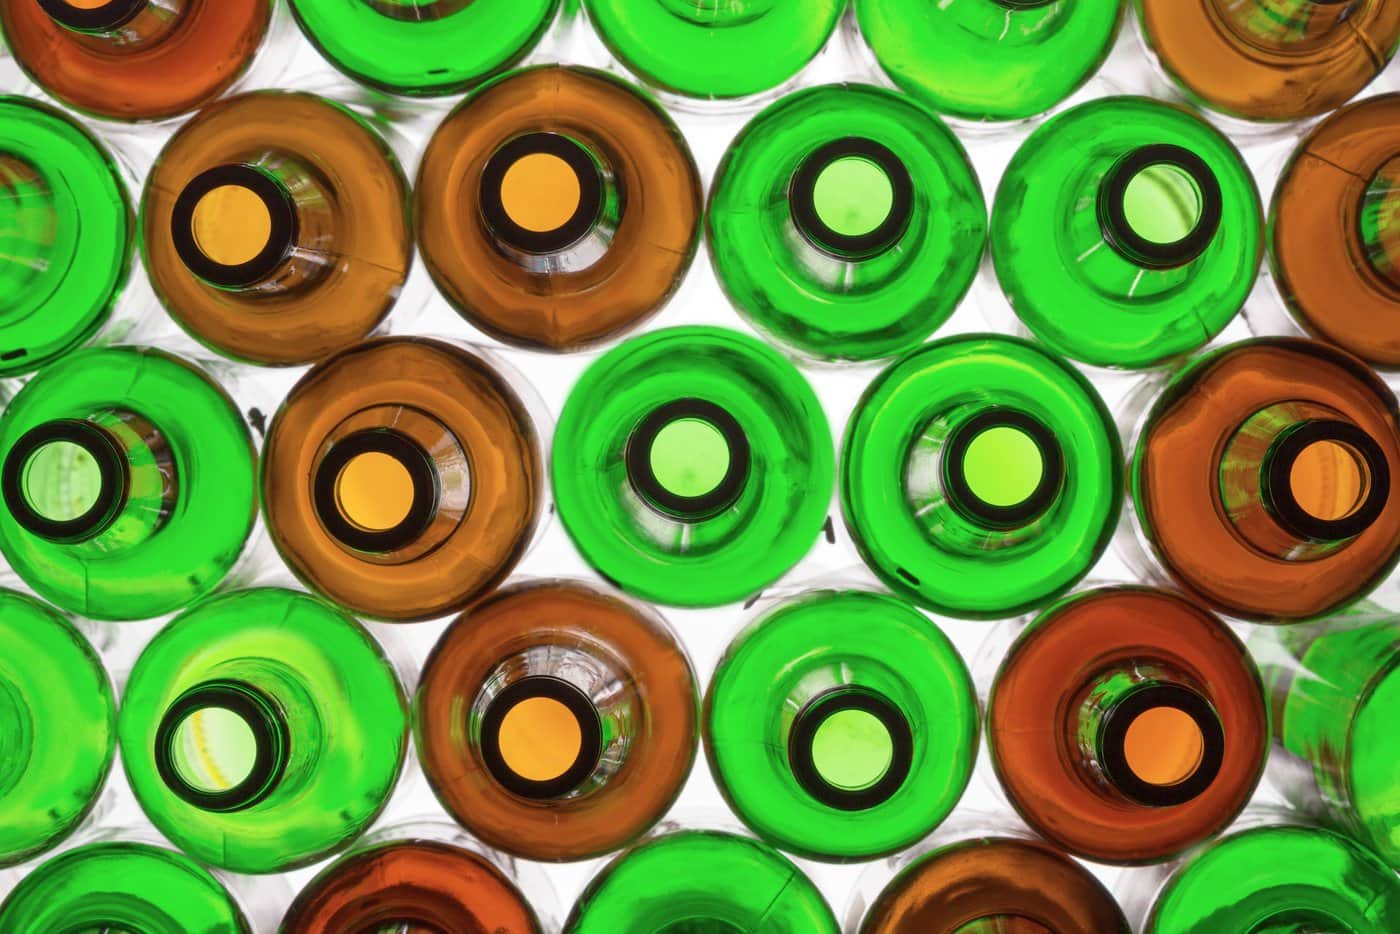 Green and brown bottles - top view